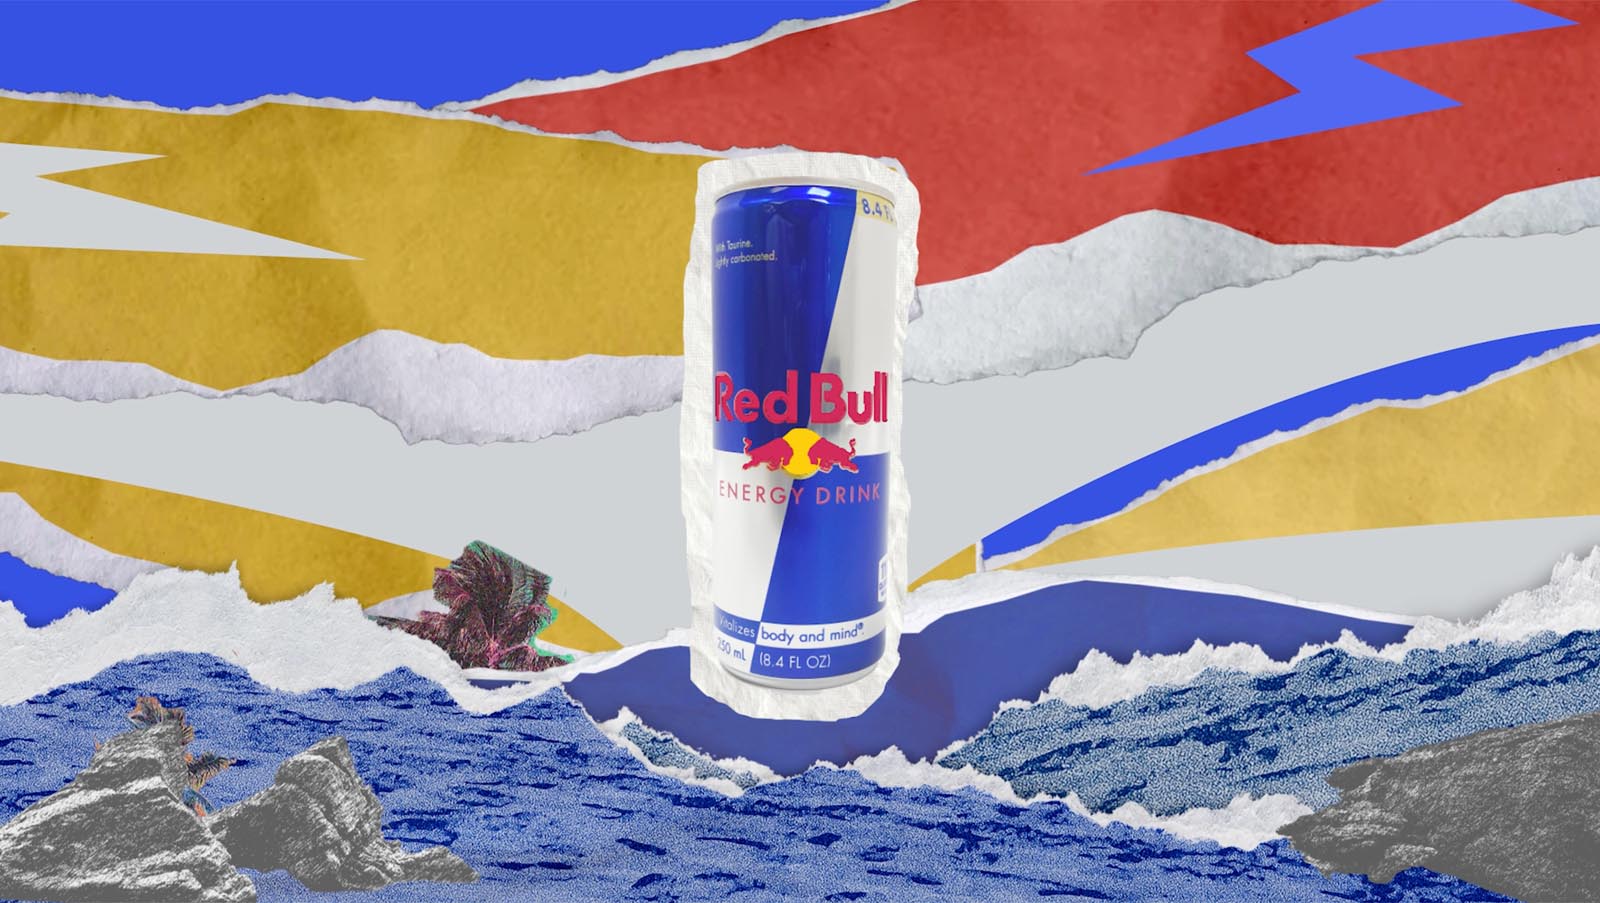 abstract background in primary colors, at center, a can of Red Bull